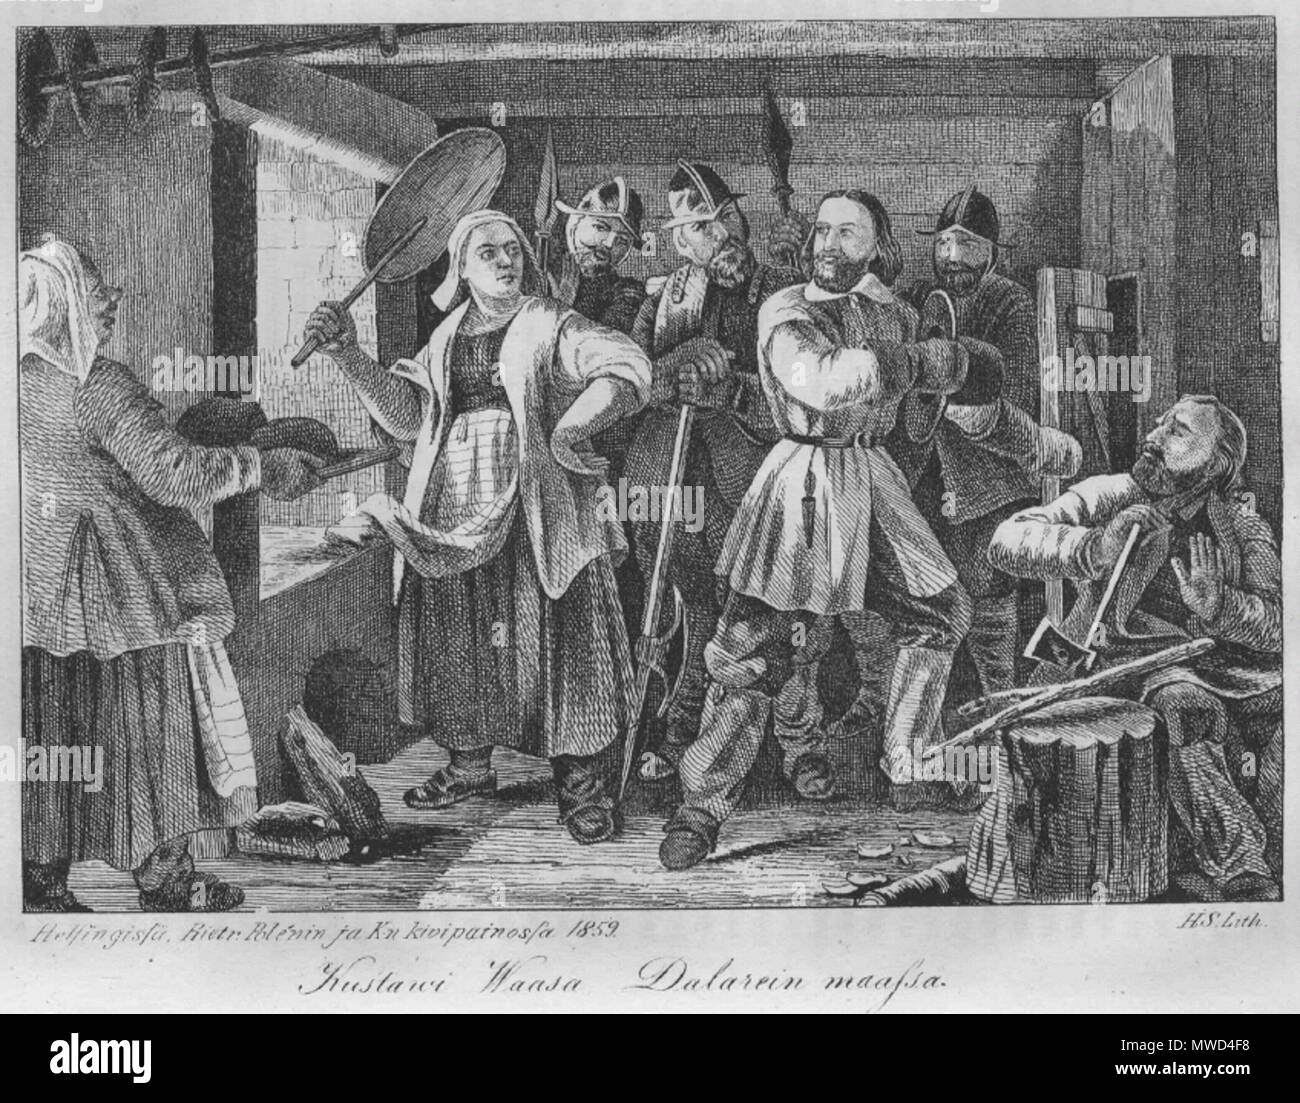 English: A farmer's wife, who has hid Gustav Vasa for Danish soldiers,  gives him a slap with a peel when he unexpectedly enters the room. They  take him for a farmhand,